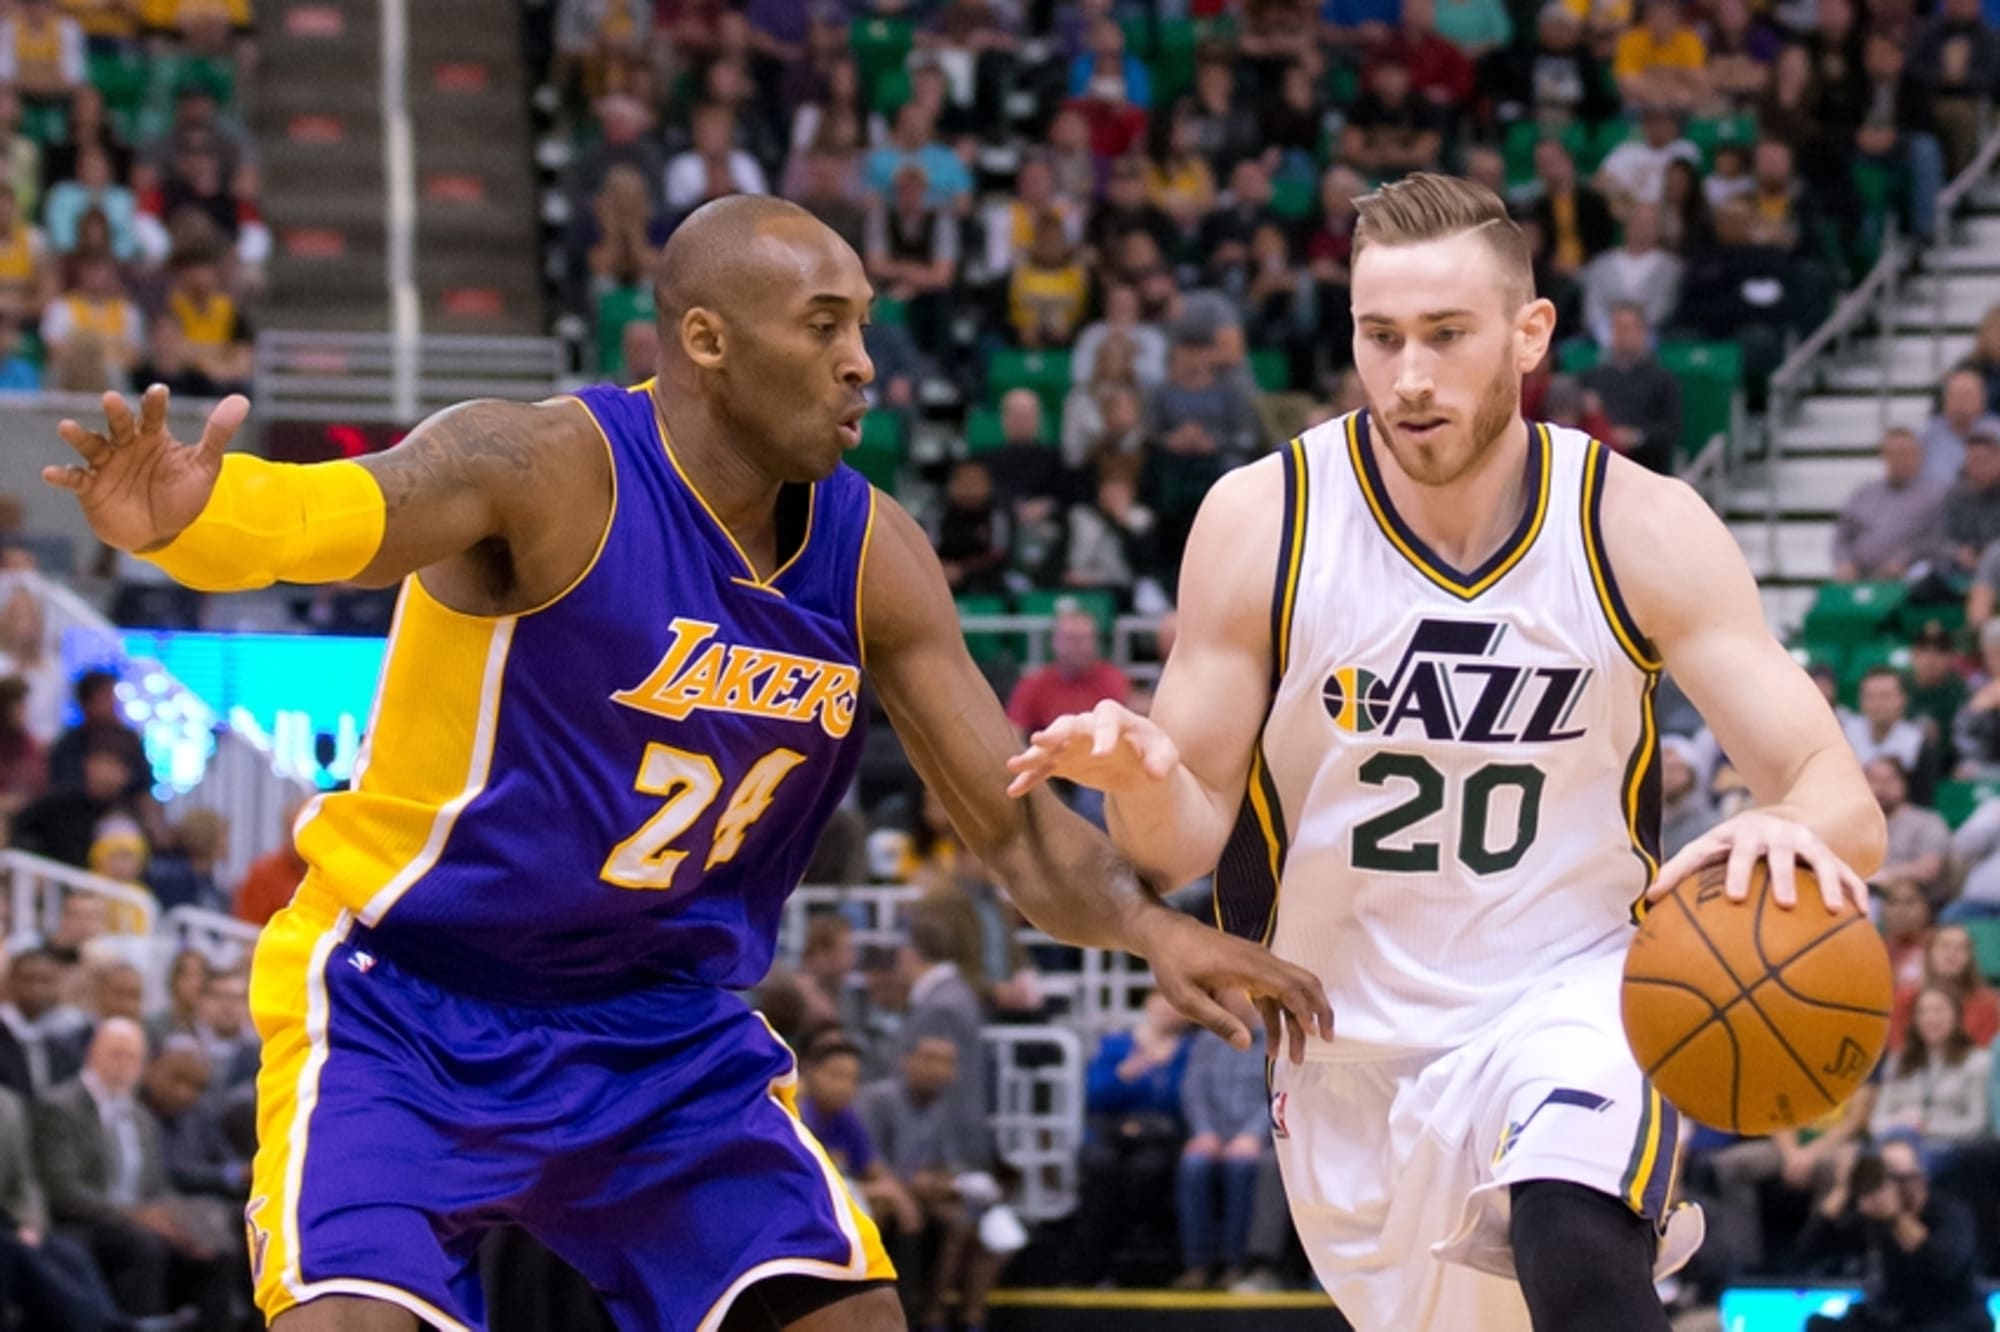 Lakers vs. Jazz Preview, Starting Time, TV Schedule, Injury Report